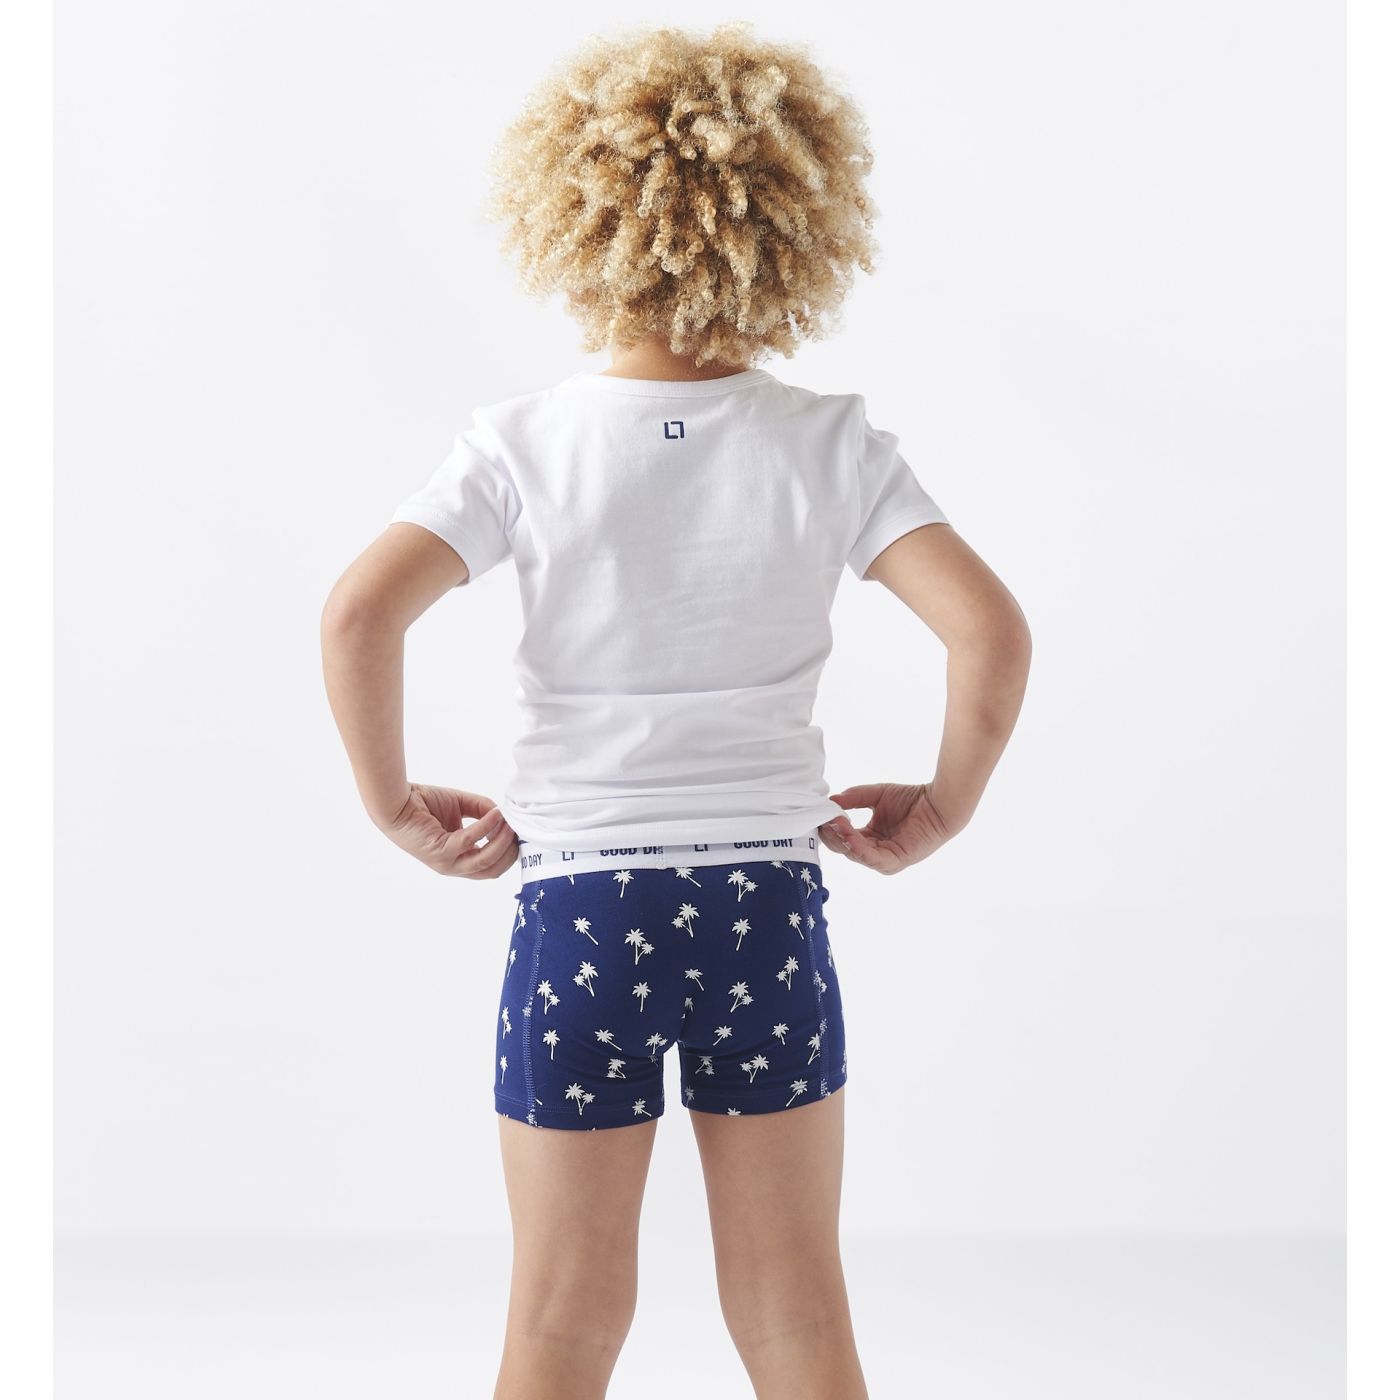 Boys' Ribbed Cotton Boxer Shorts - 2-Pack 